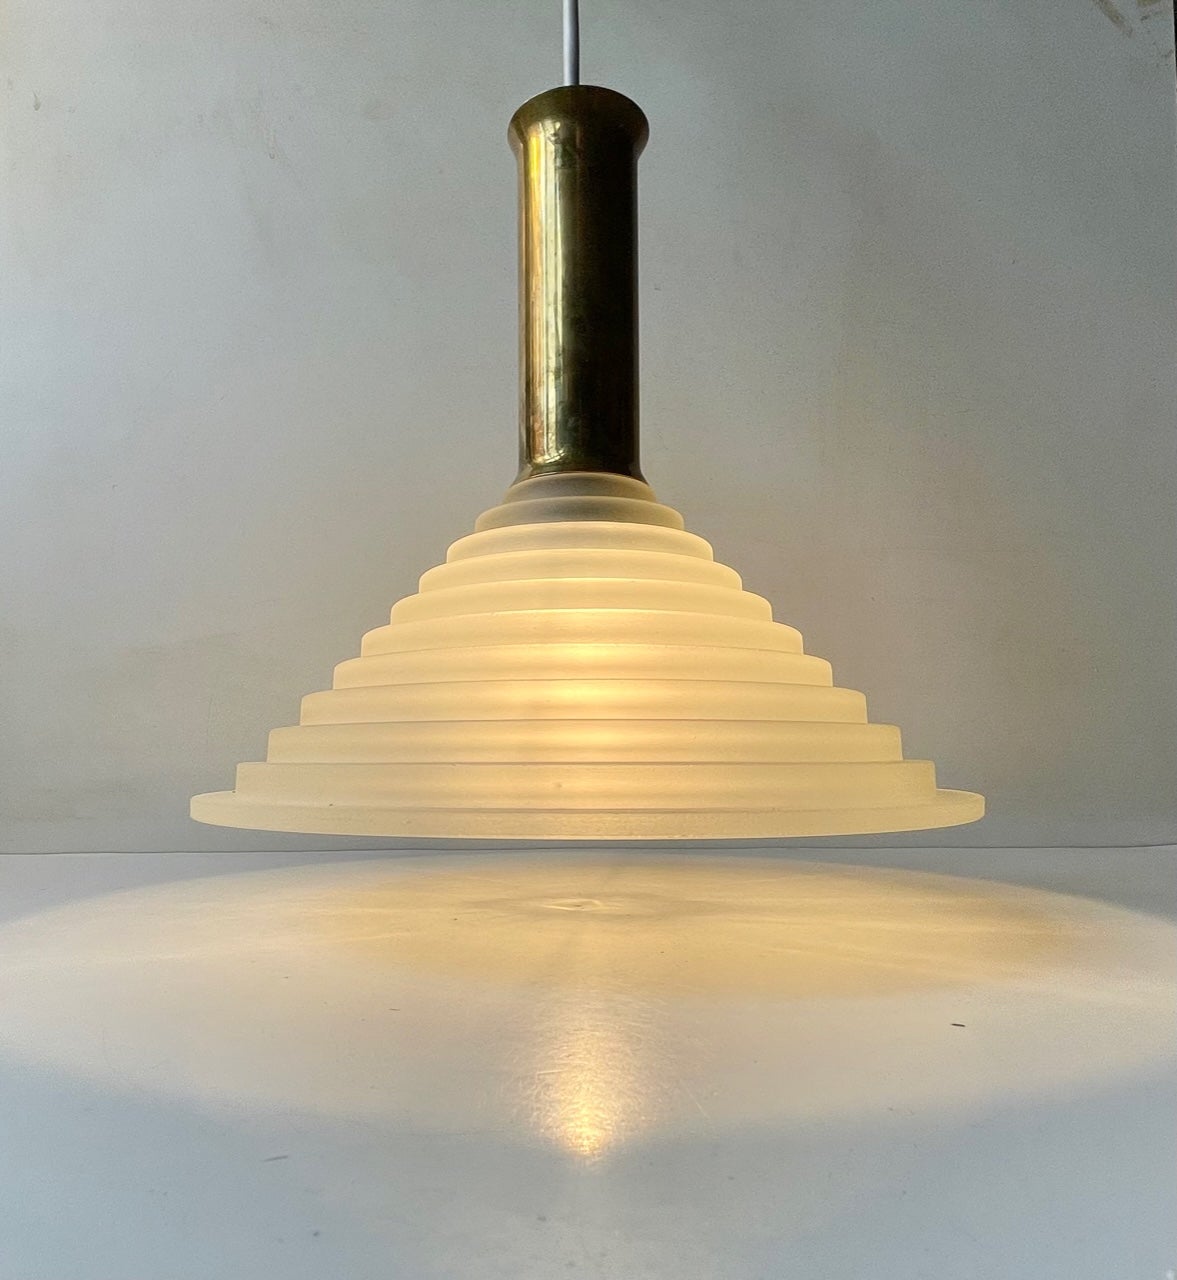 Vintage Italian Art Deco Revival Pendant Lamp in Brass and Glass For Sale 1